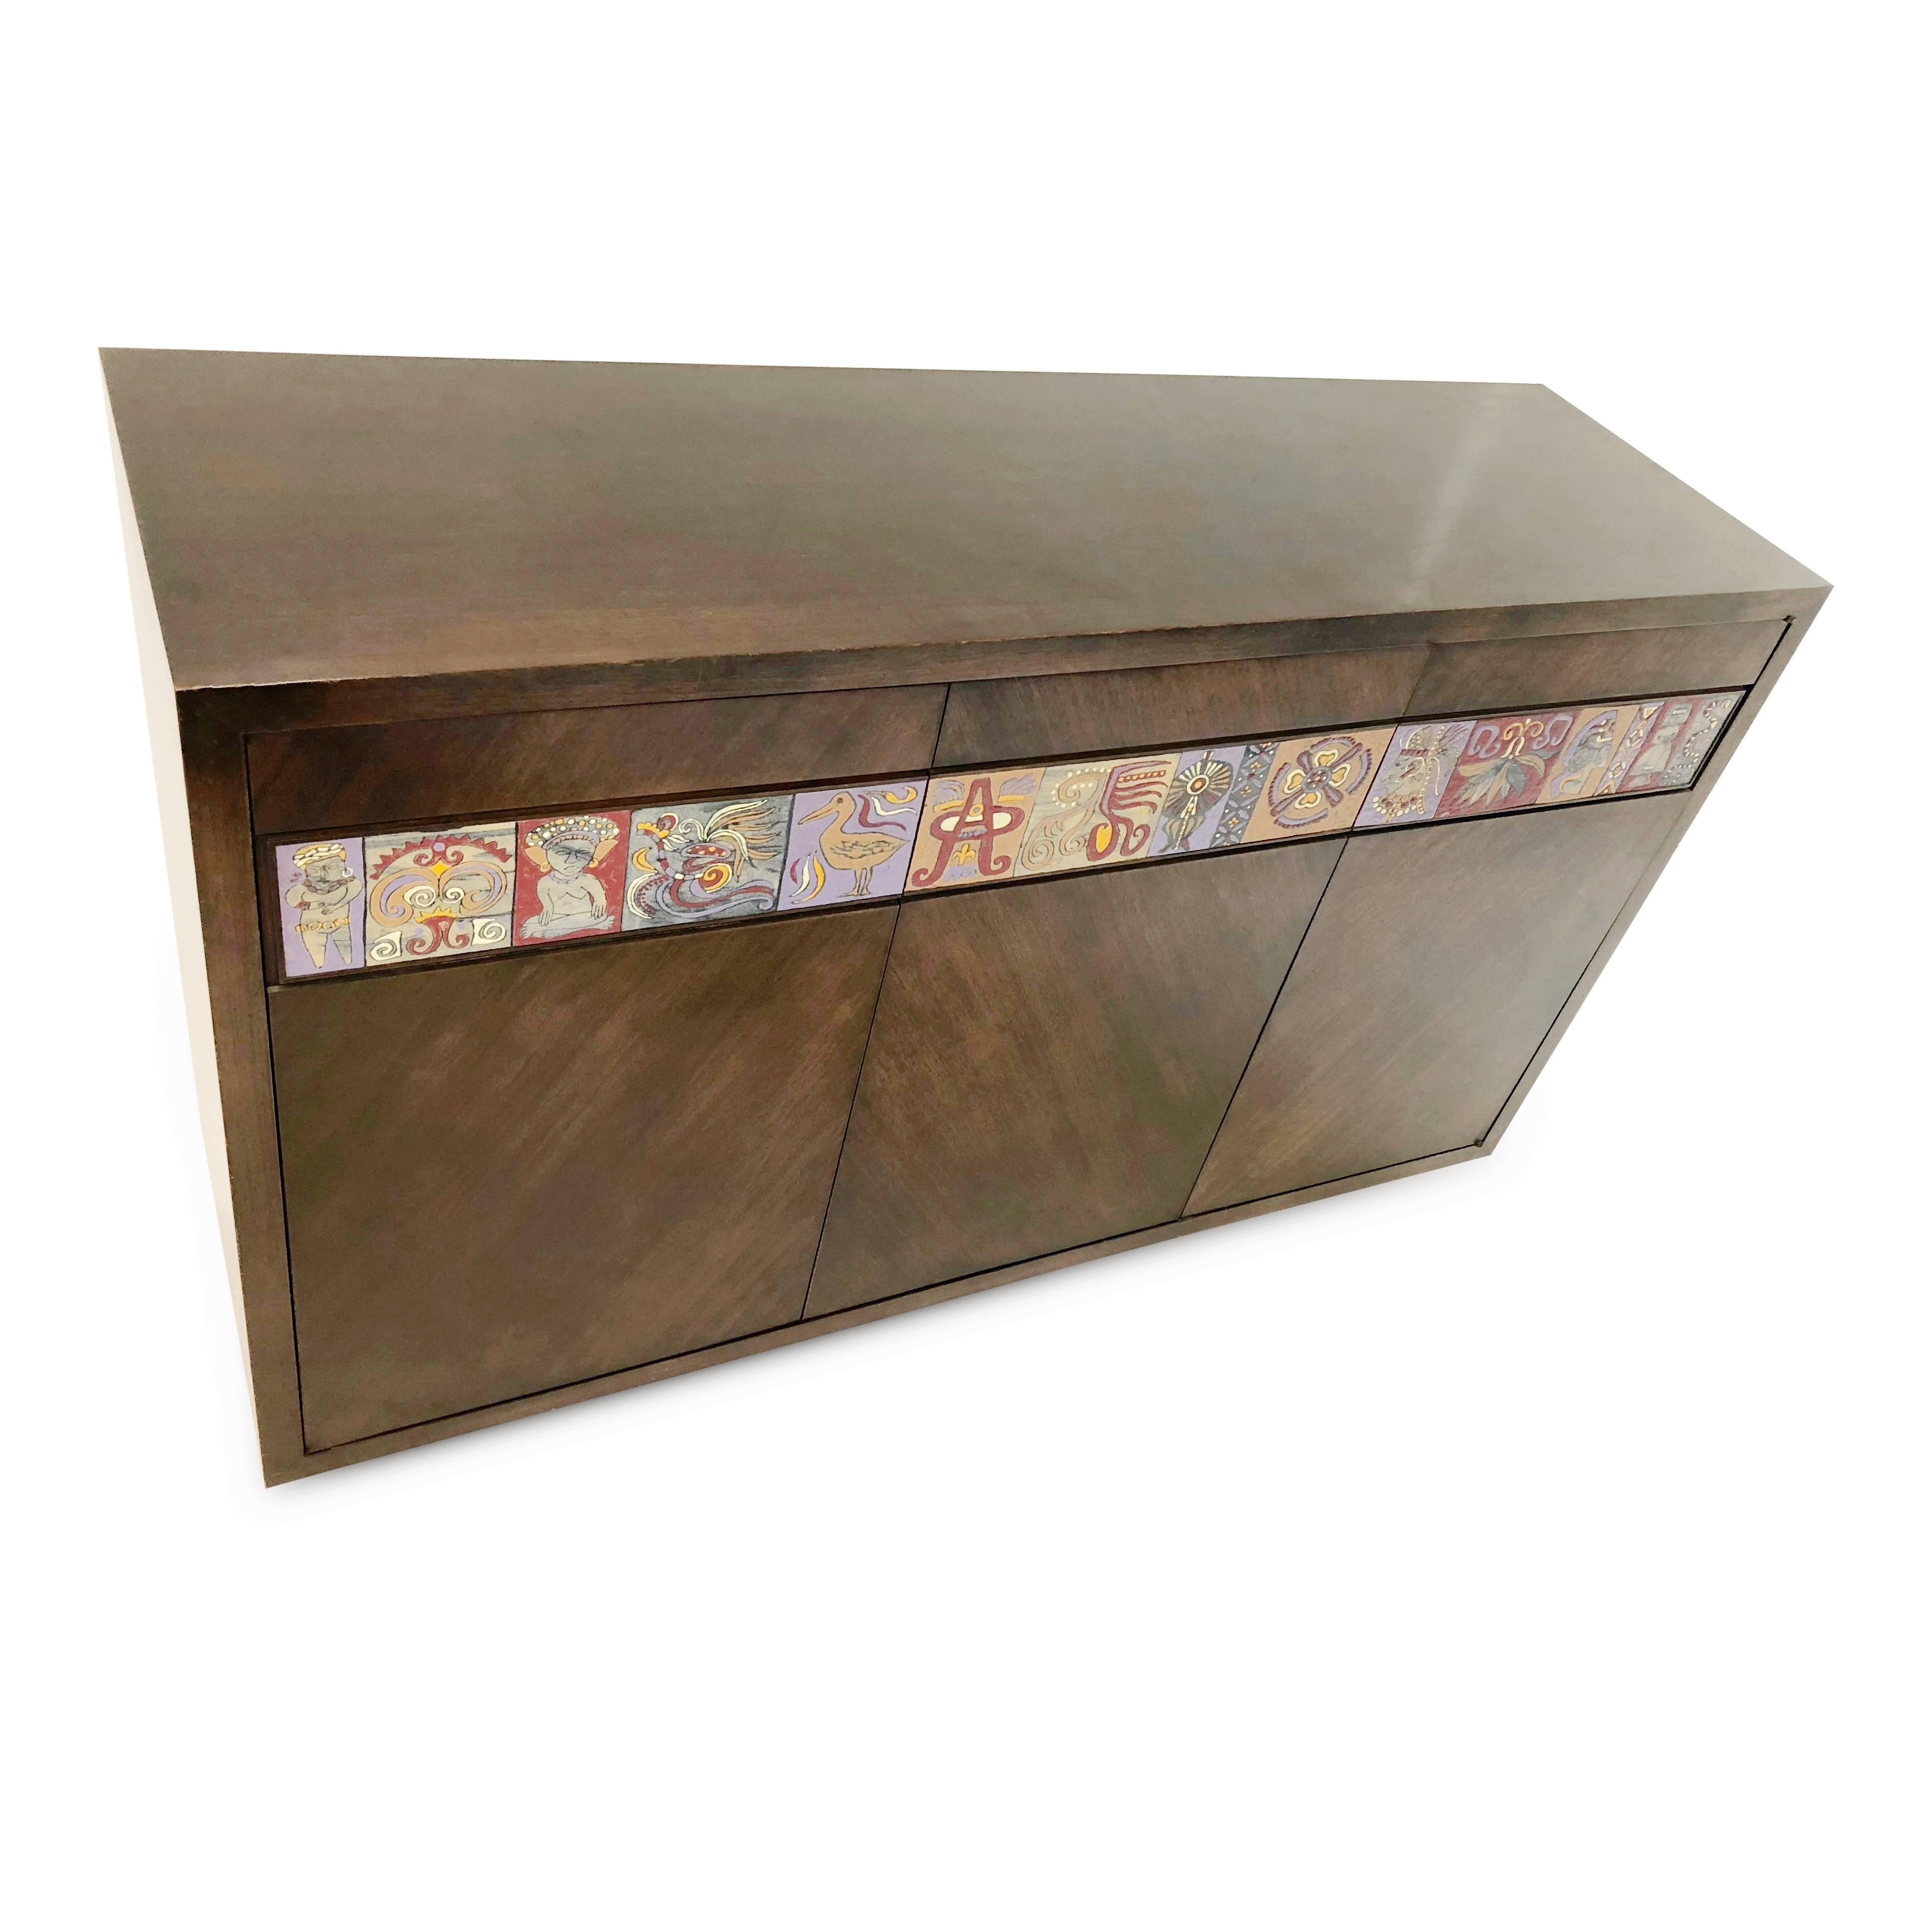 Mid-20th Century Mexican Modernist Enameled Tile Credenza, circa 1950